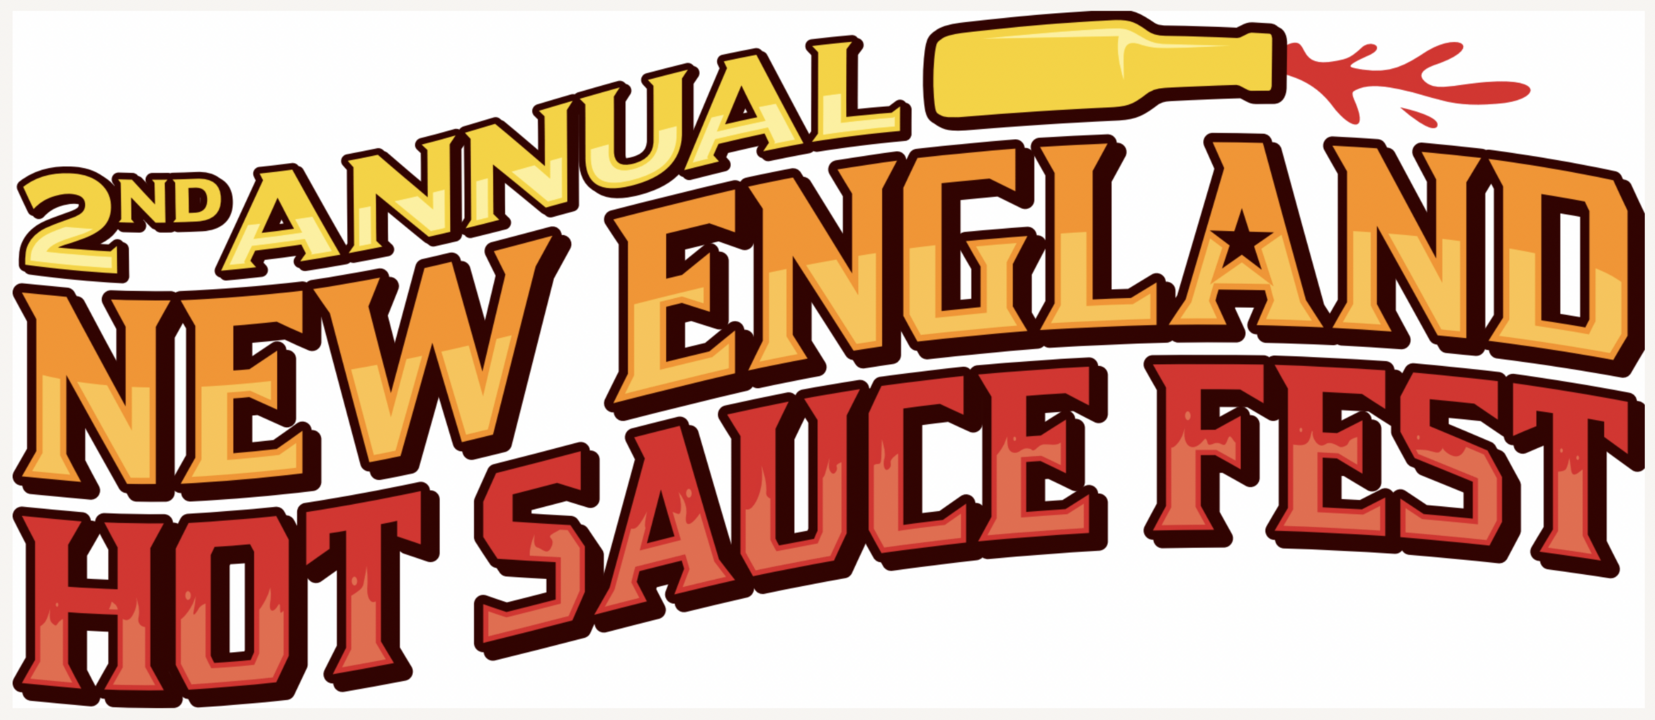 new england hot sauce fest second annual